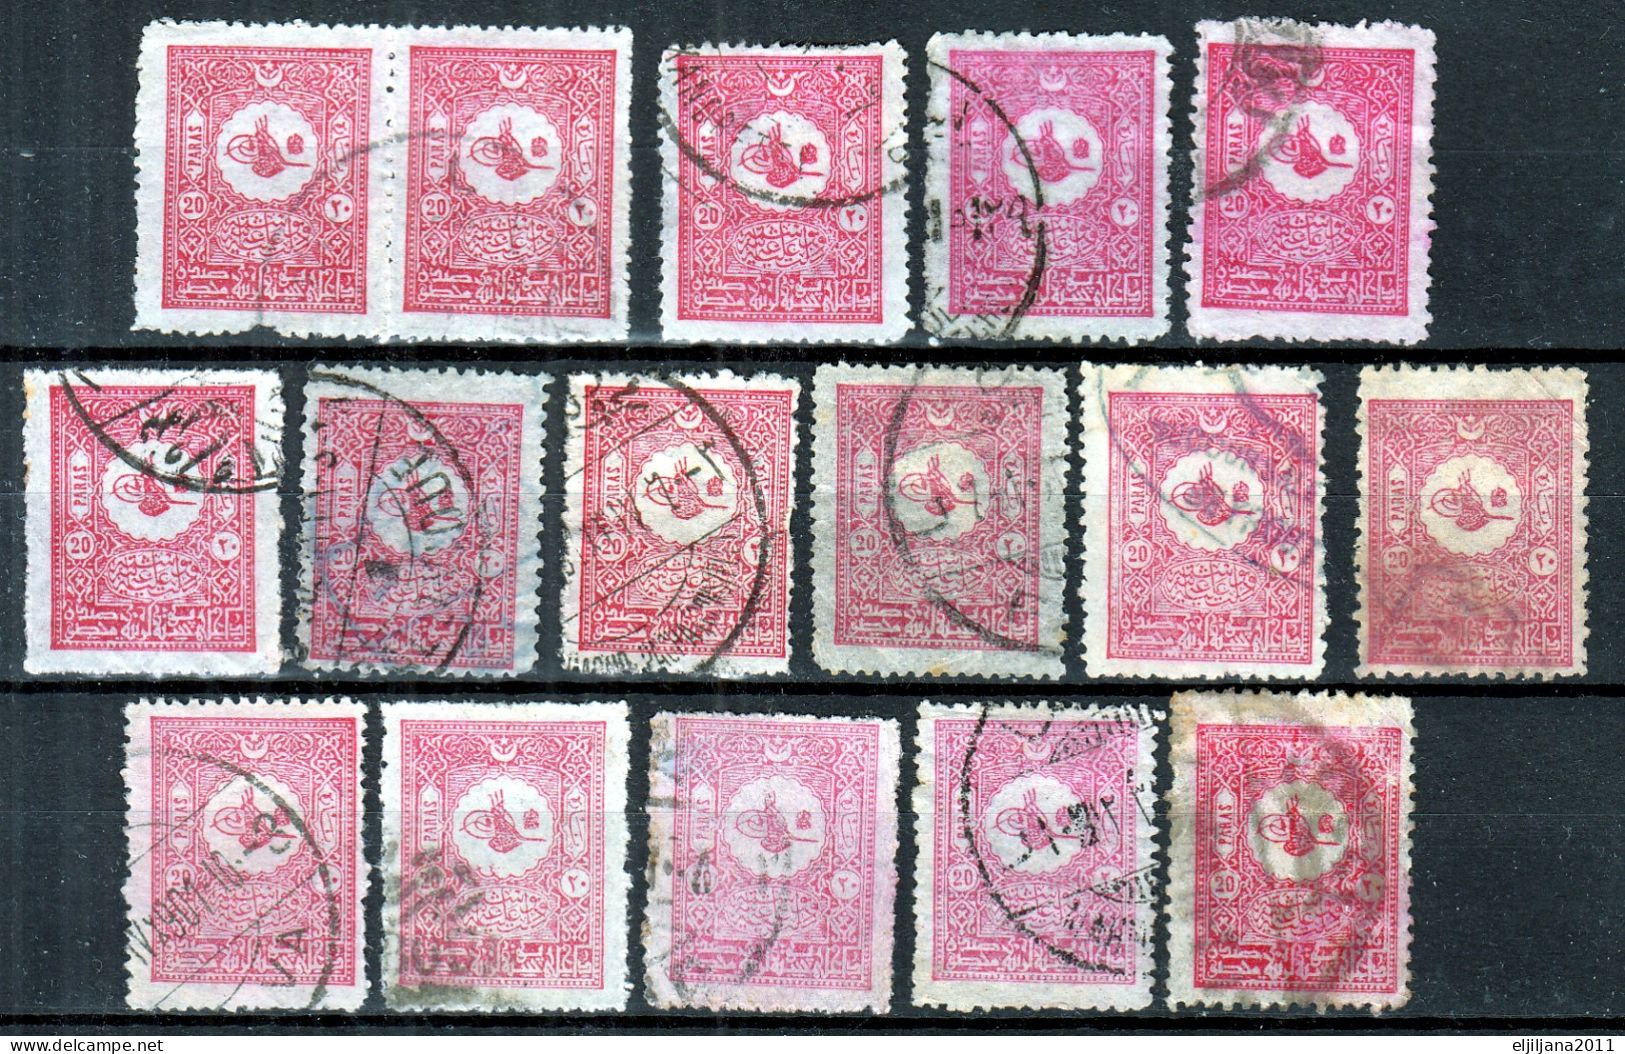 ⁕ Turkey 1901 - 1905 ⁕ Ottoman Empire / Tughra, Domestic Post 20 Pa. Mi.88 ⁕ 26v Used - Shades (unchecked Perf.) Scan - Used Stamps